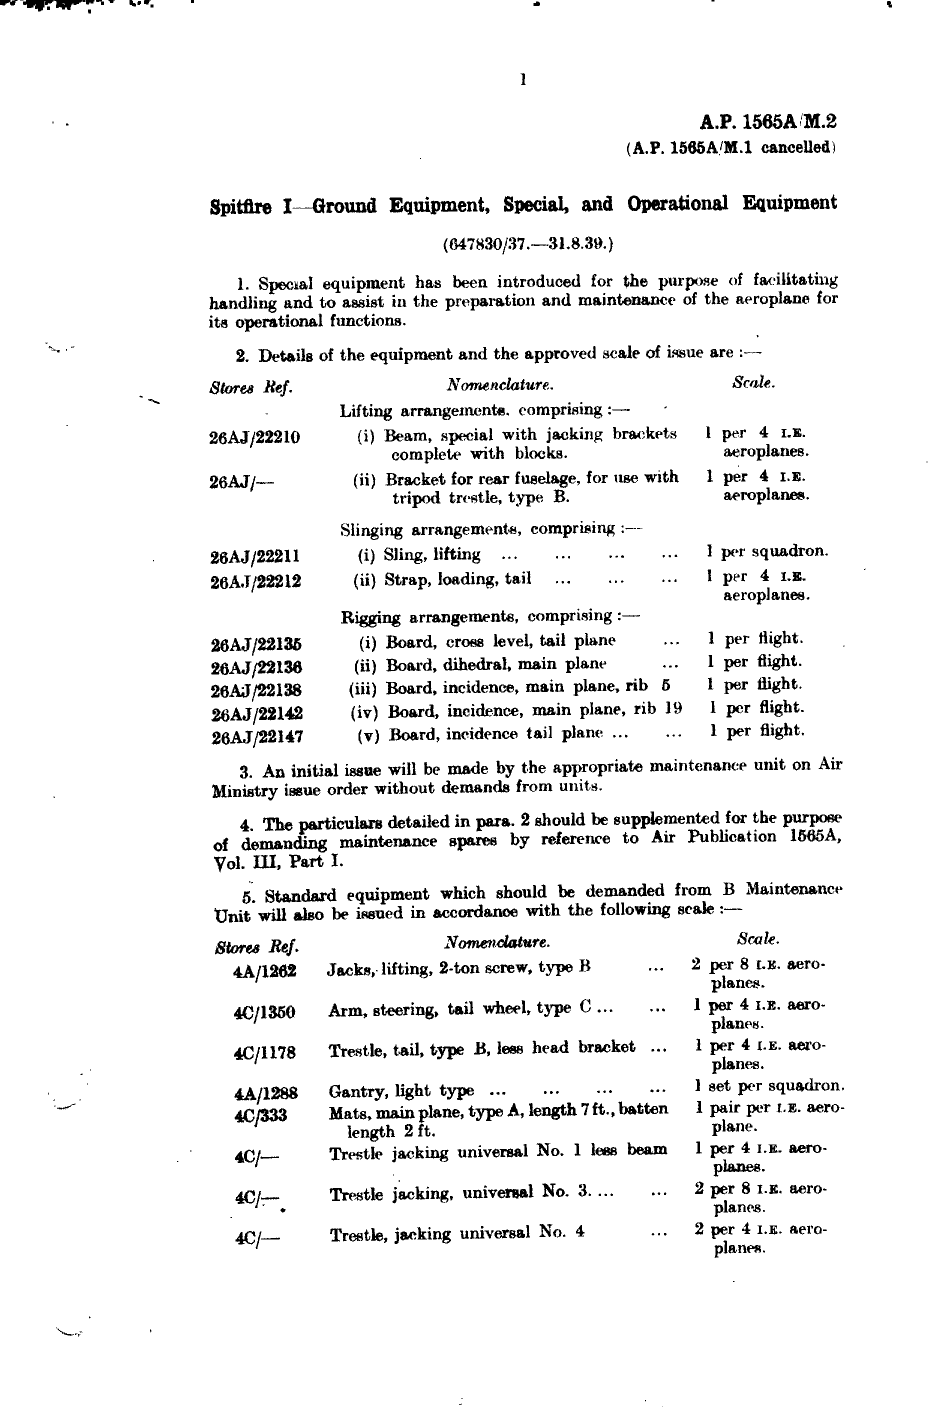 Sample page 1 from AirCorps Library document: Spitfire I Ground Equipment, Special, and Operational Equipment